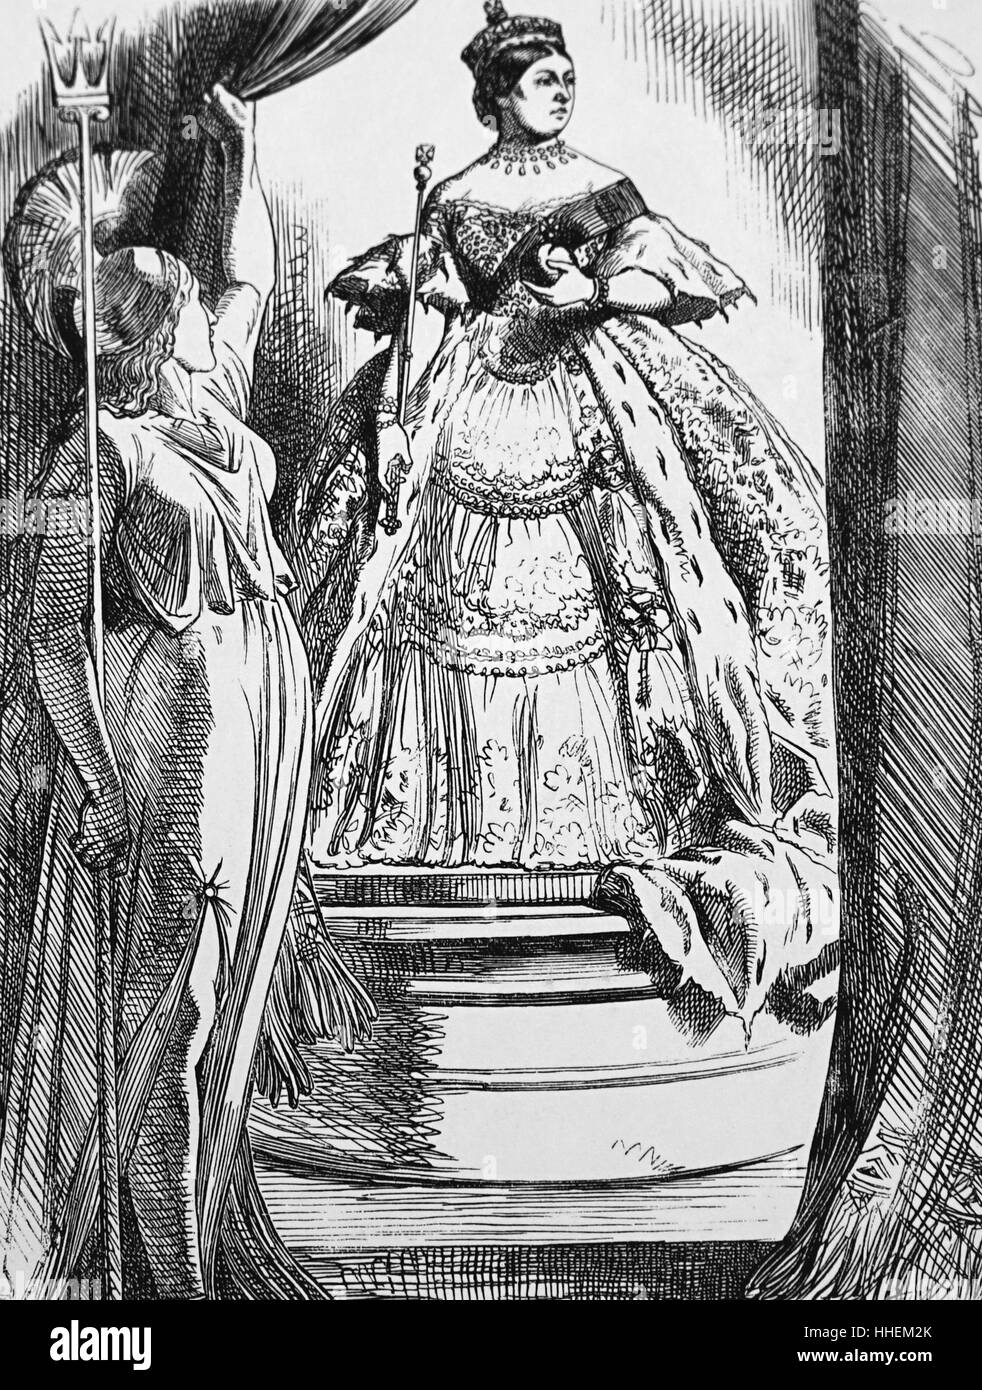 Cartoon depicting Queen Victoria being urged by Britannia to come back into the world after her long mourning. Cartoon by John Tenniel (1820-1914) an English illustrator, graphic humourist, and political cartoonist. Dated 19th Century Stock Photo